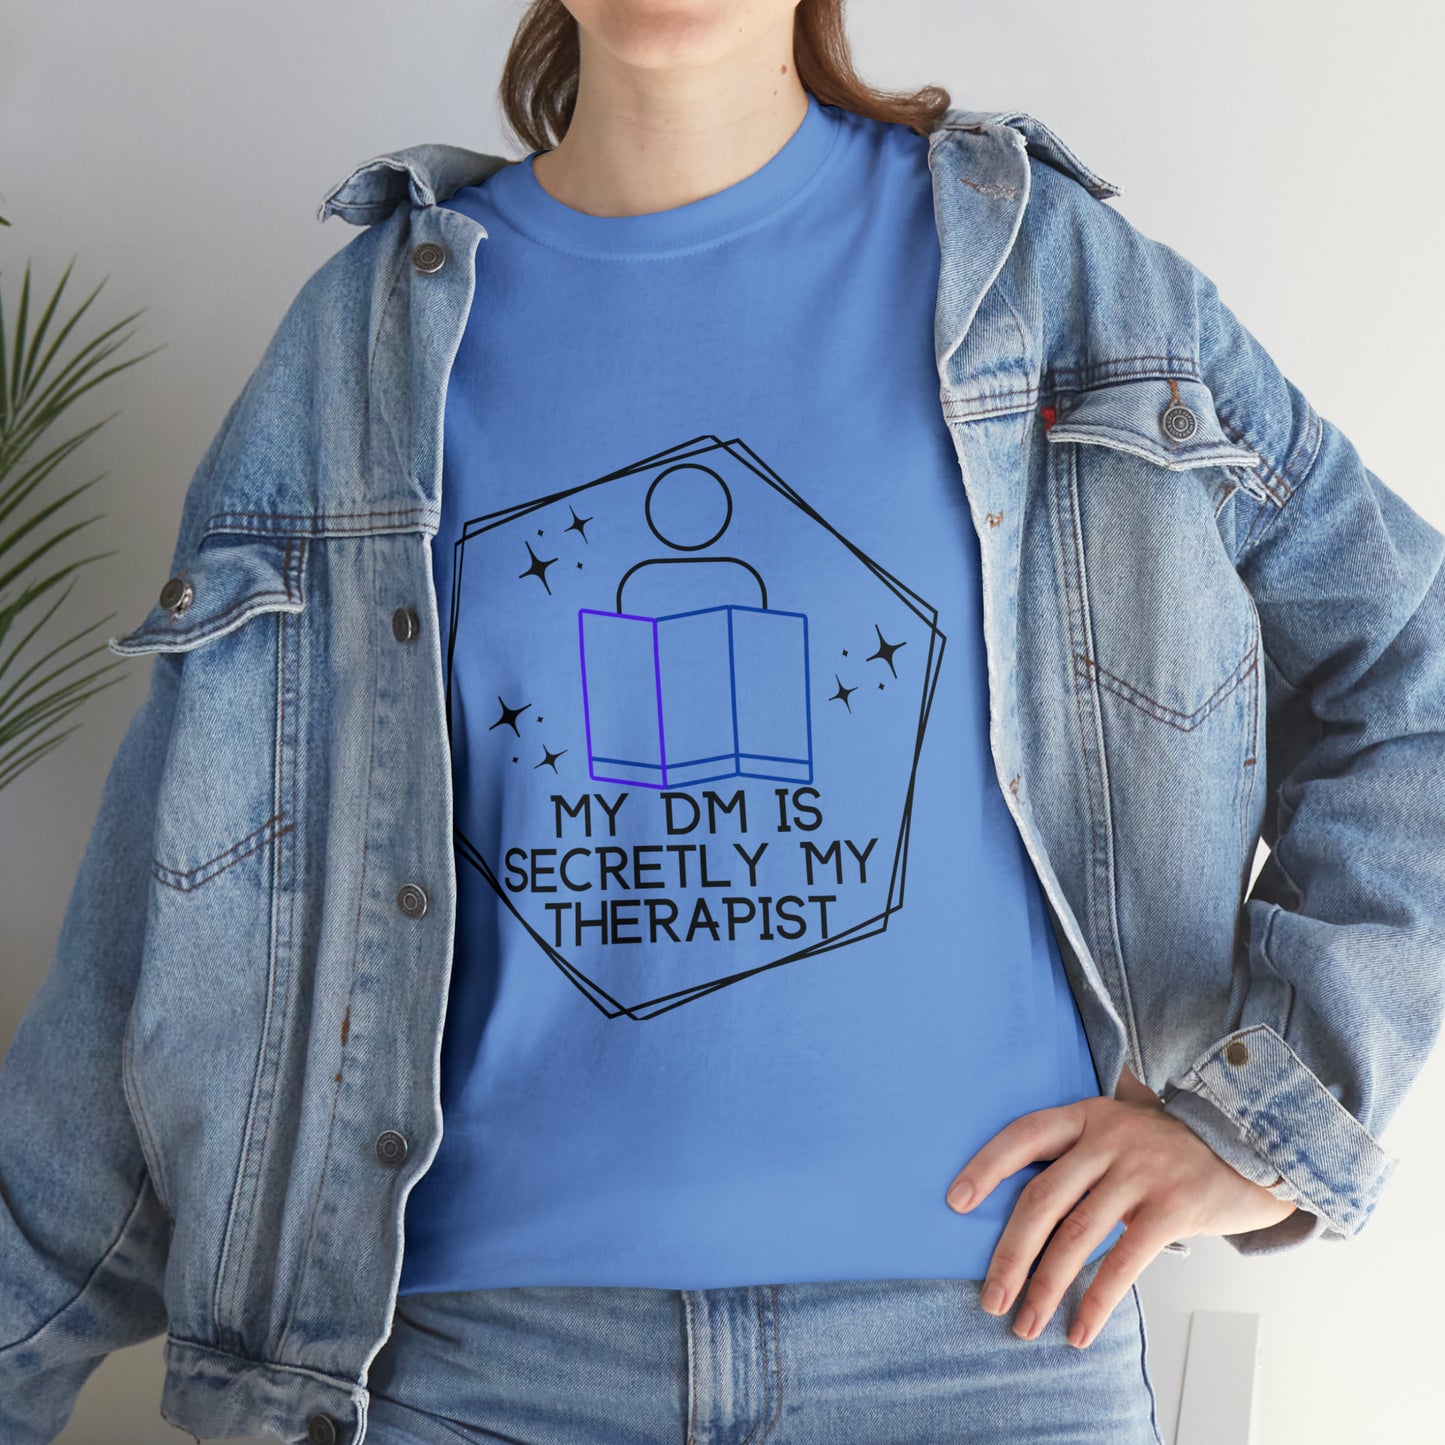 Funny DnD Shirt "DM is Secretly My Therapist" TShirt Tee for any RPG player